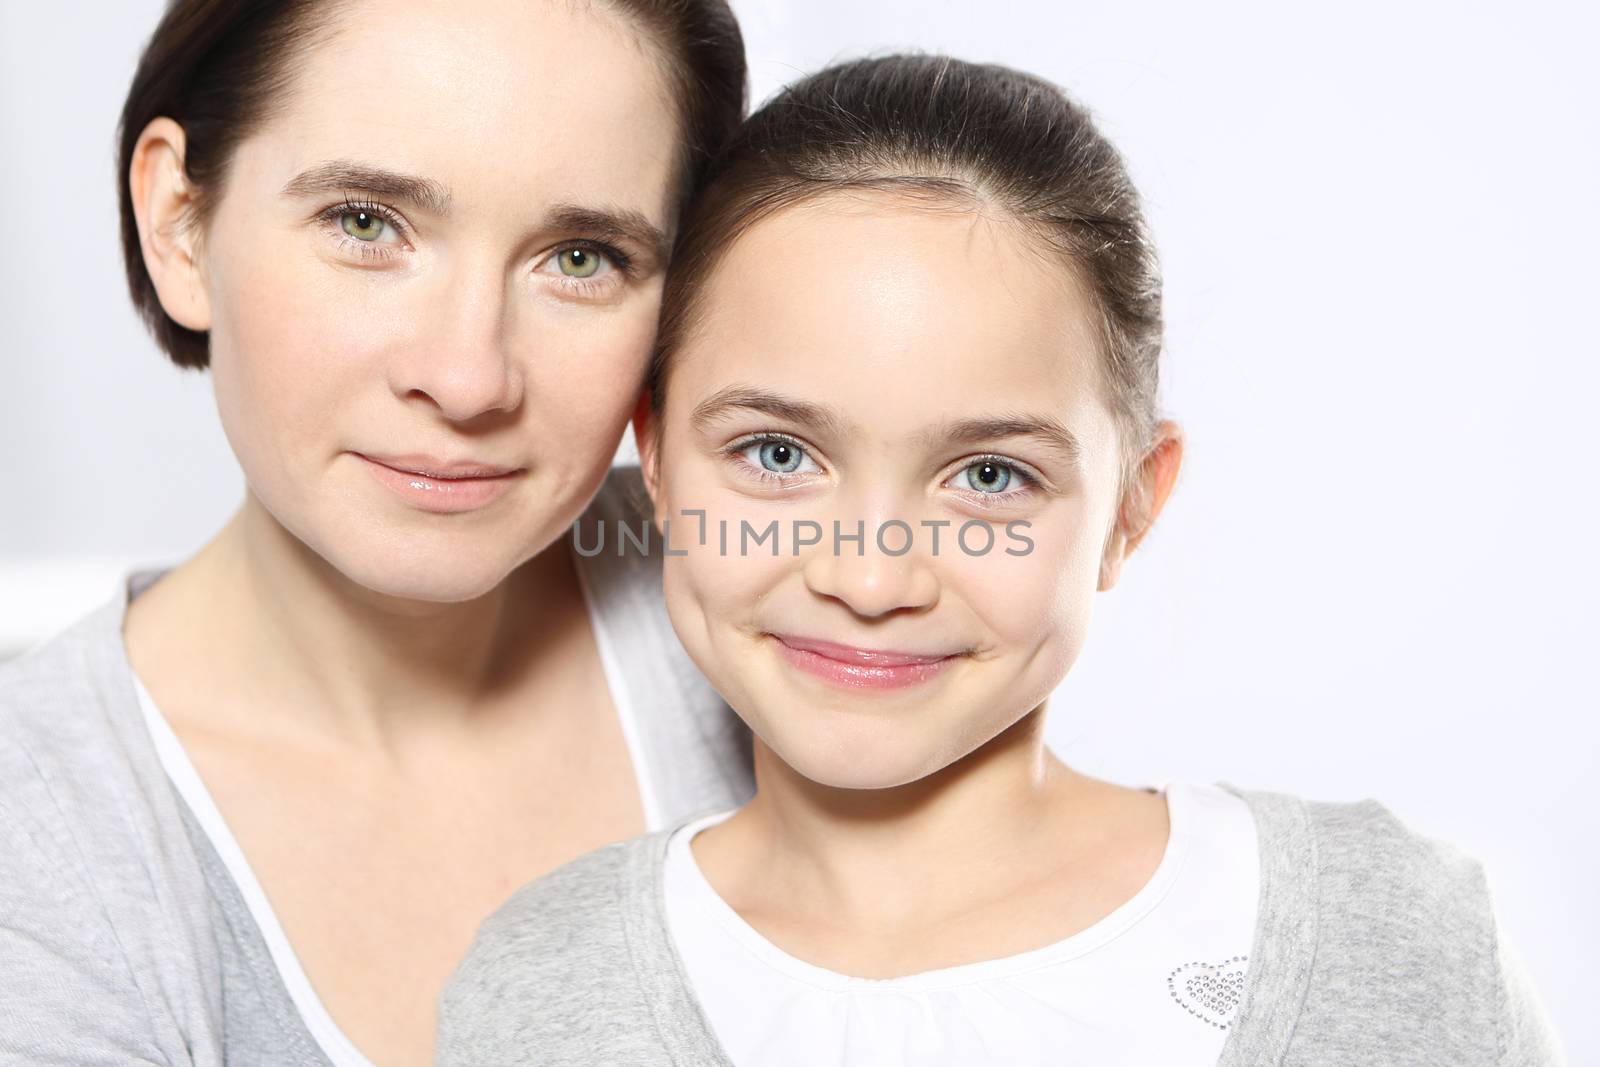 Mother and daughter by robert_przybysz